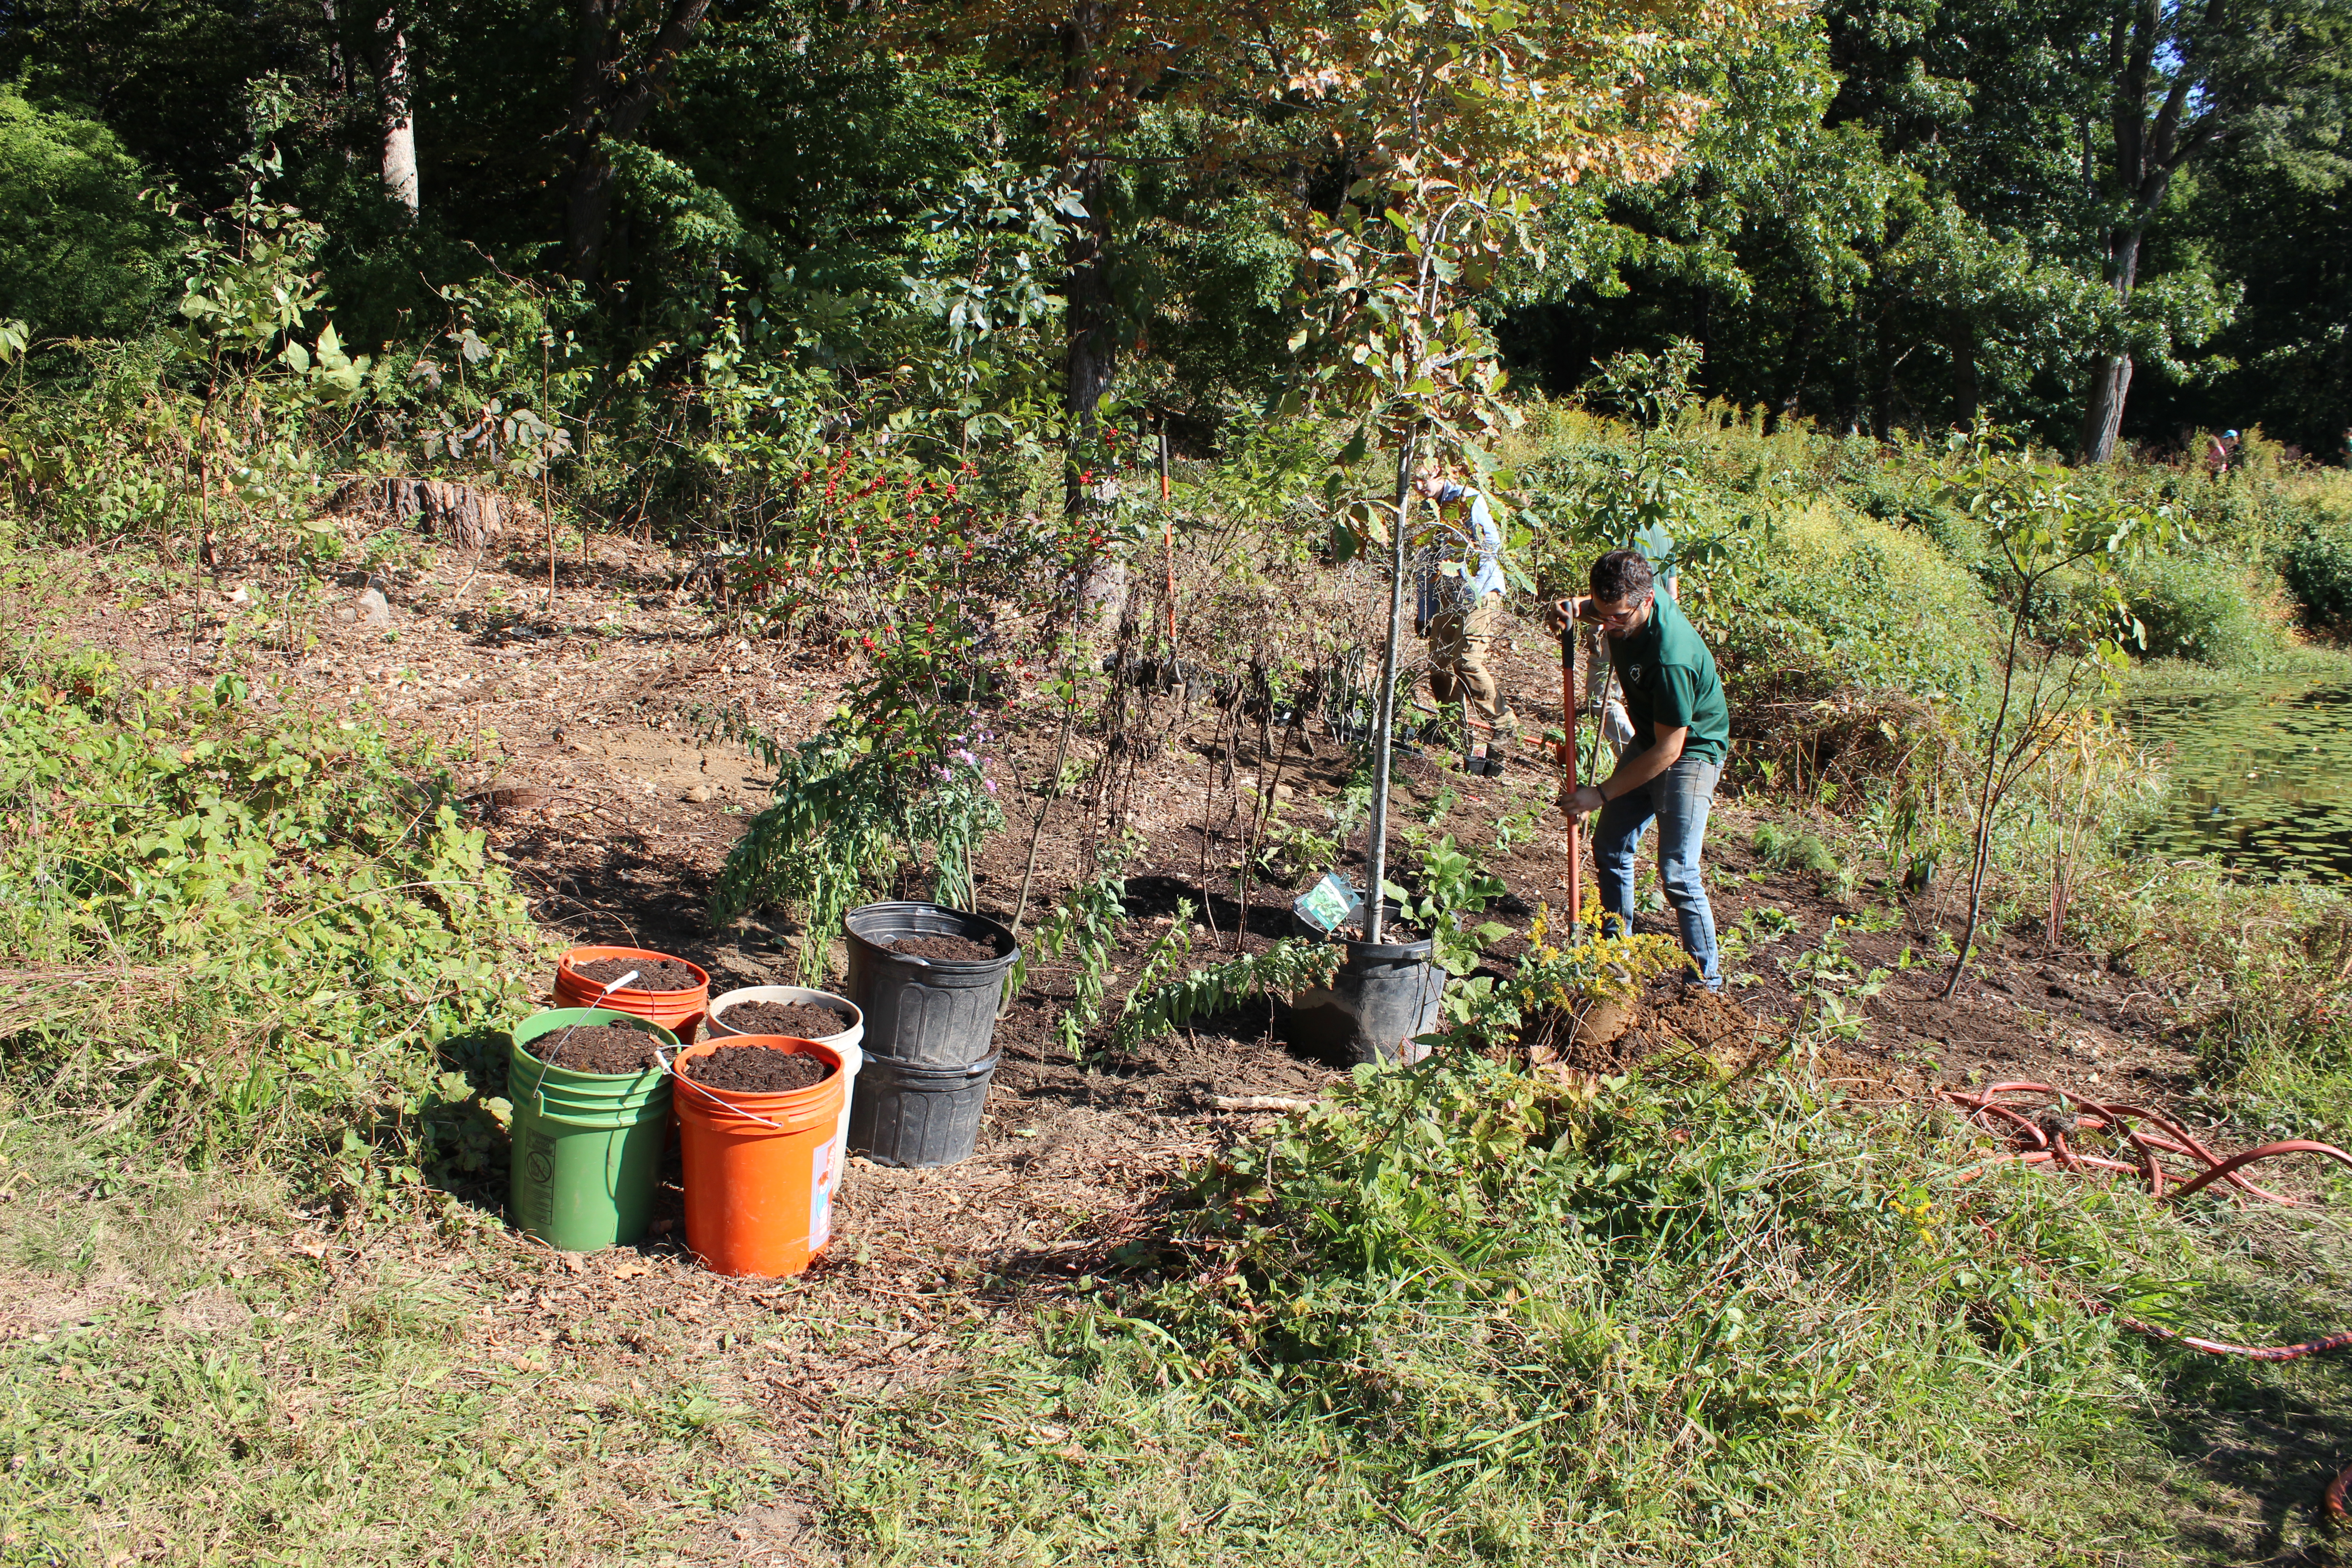 Planting native plants after invasive removal in 2017